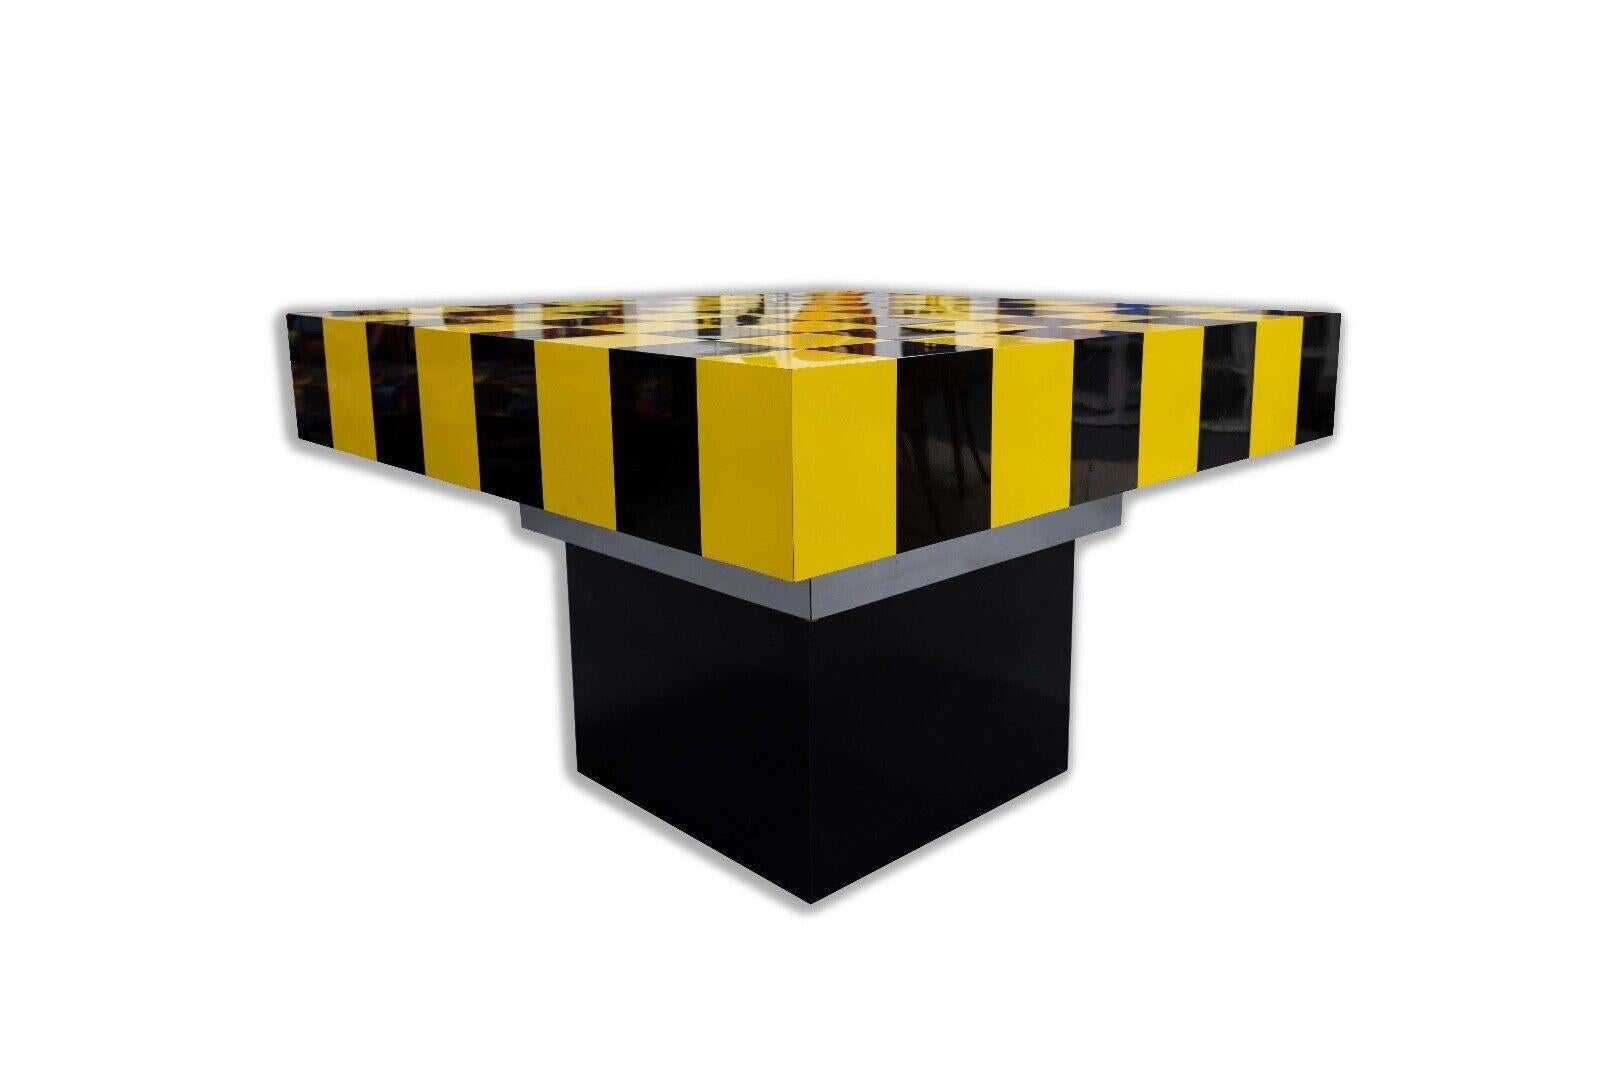 Vibrant and visually impactful, this Mid Century Modern Dining/Game Table features a checkered black and yellow tabletop. The bold pattern is reminiscent of a classic game board, suggesting versatility and fun. Its solid black base provides a sturdy